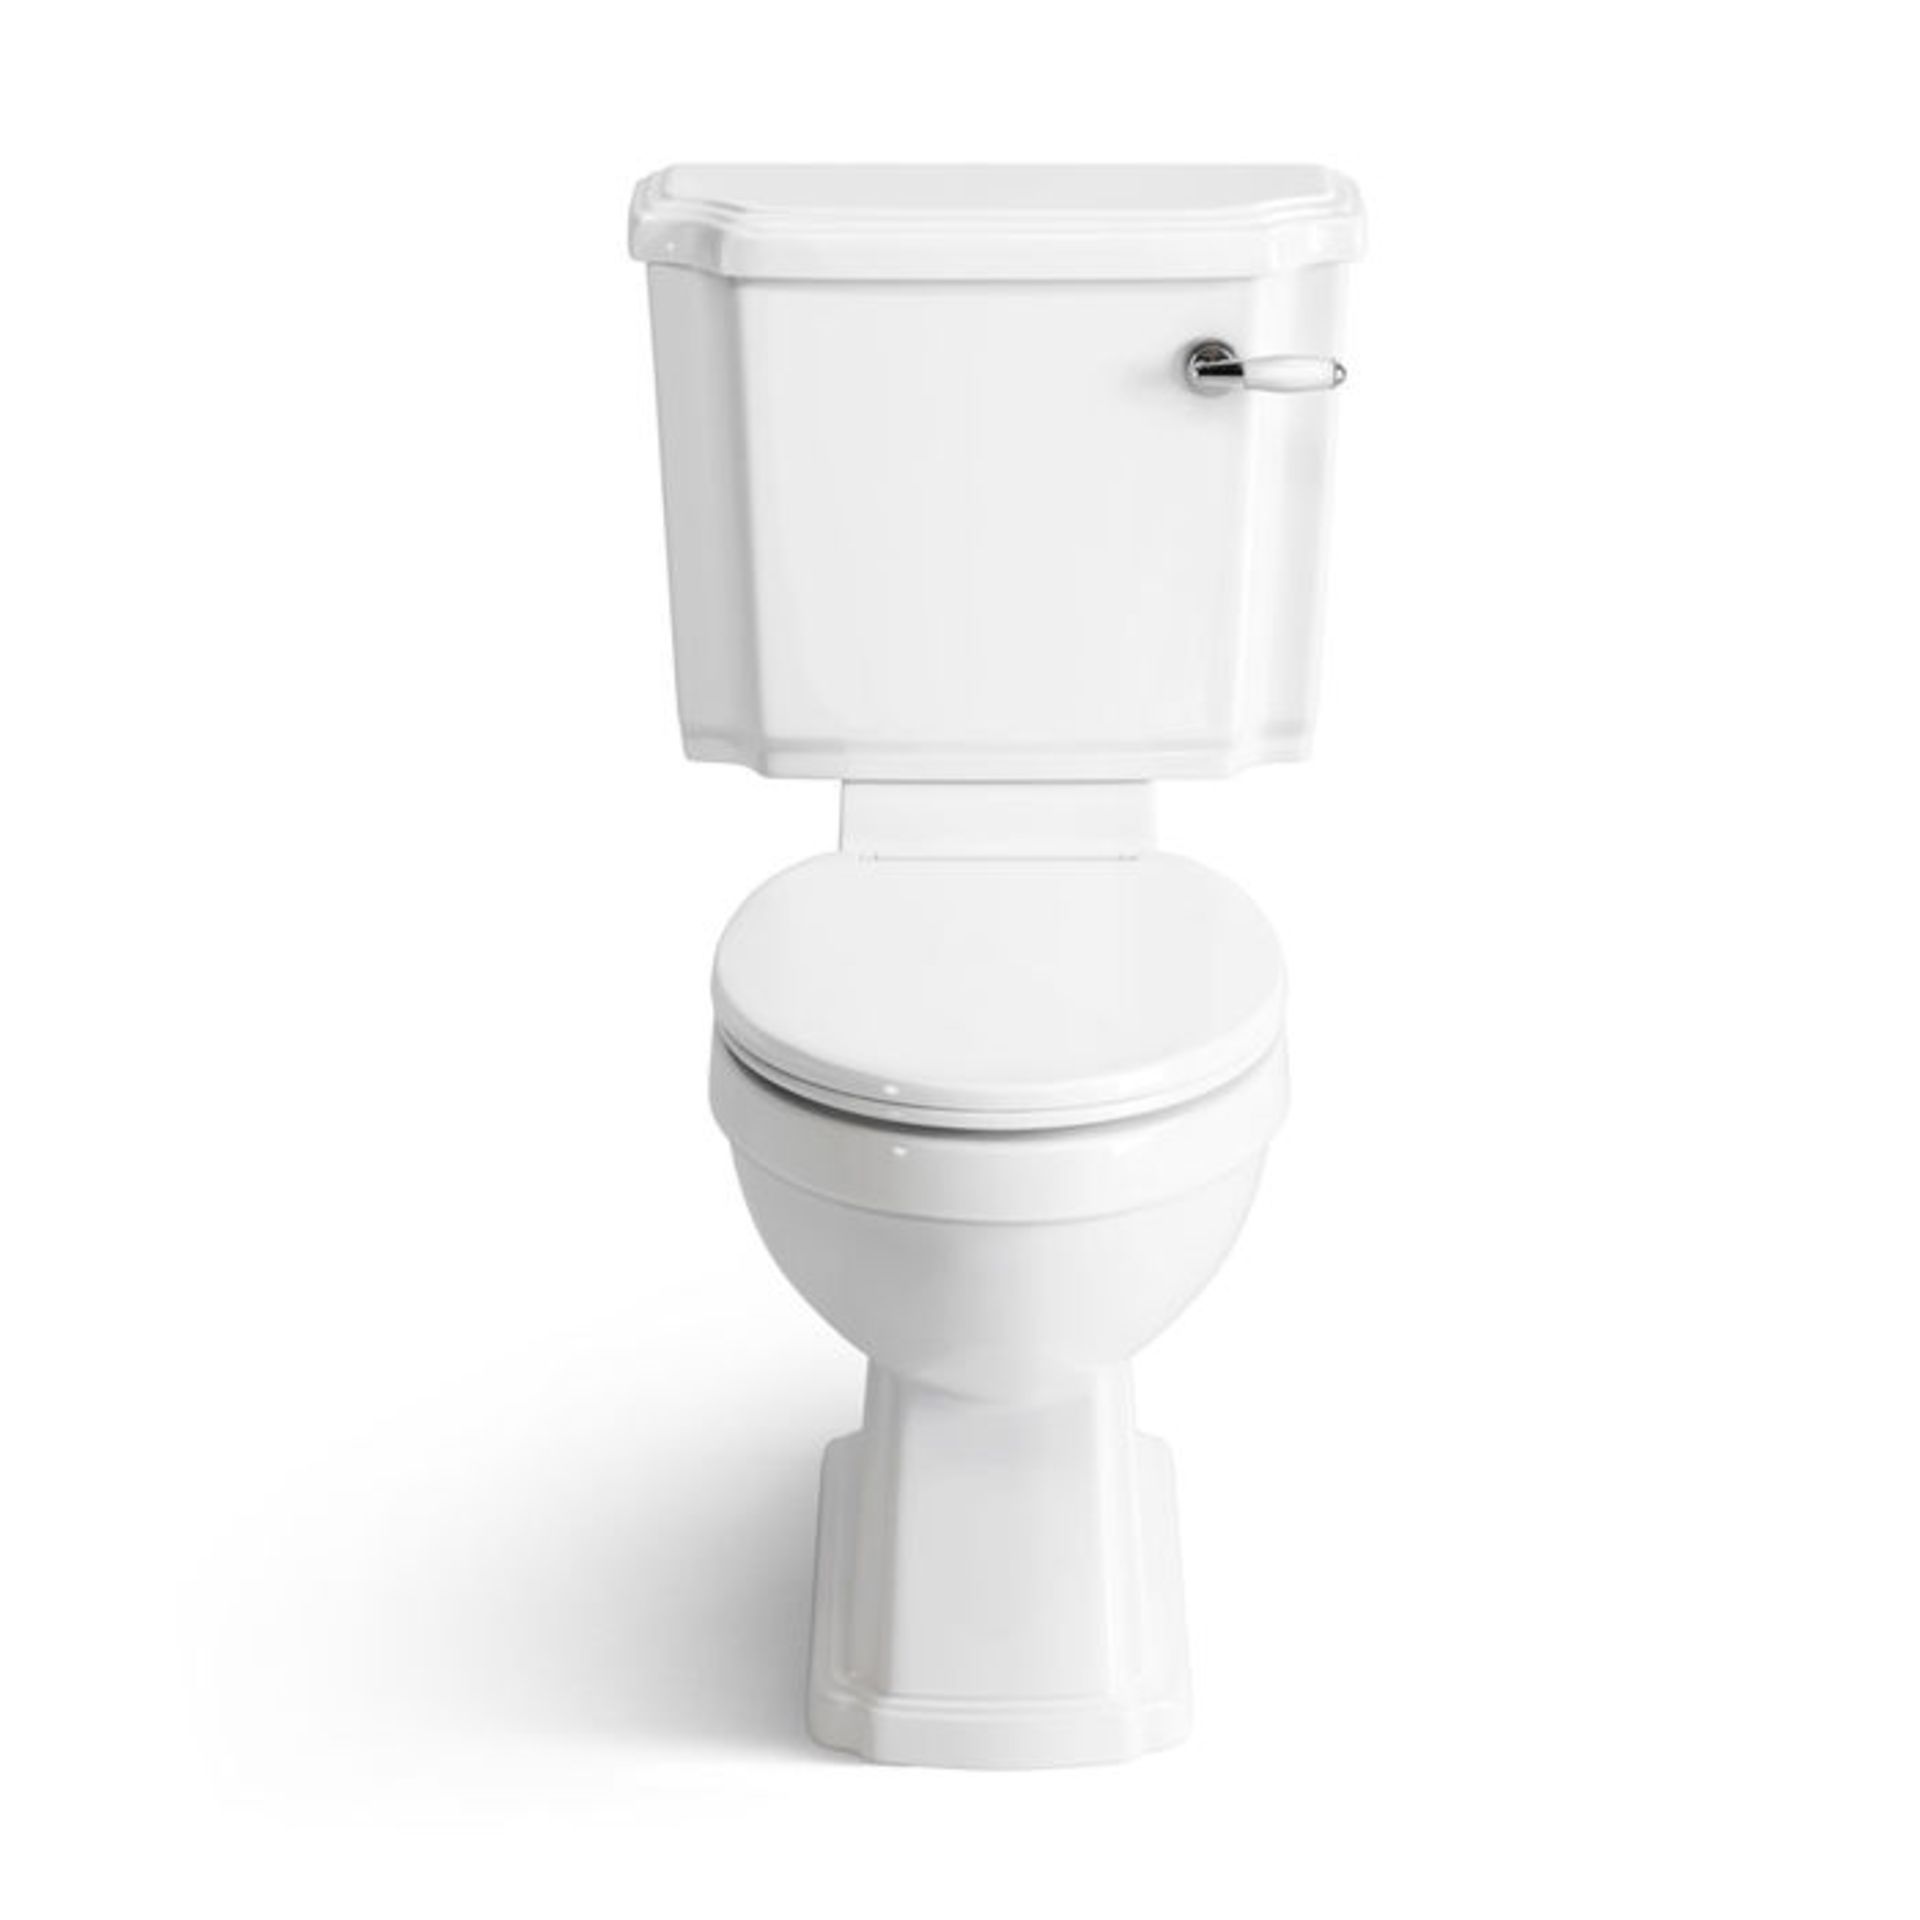 NEW & BOXED Cambridge Traditional Close Coupled Toilet & Cistern - White Seat. CCG629PAN.Traditional - Image 3 of 3